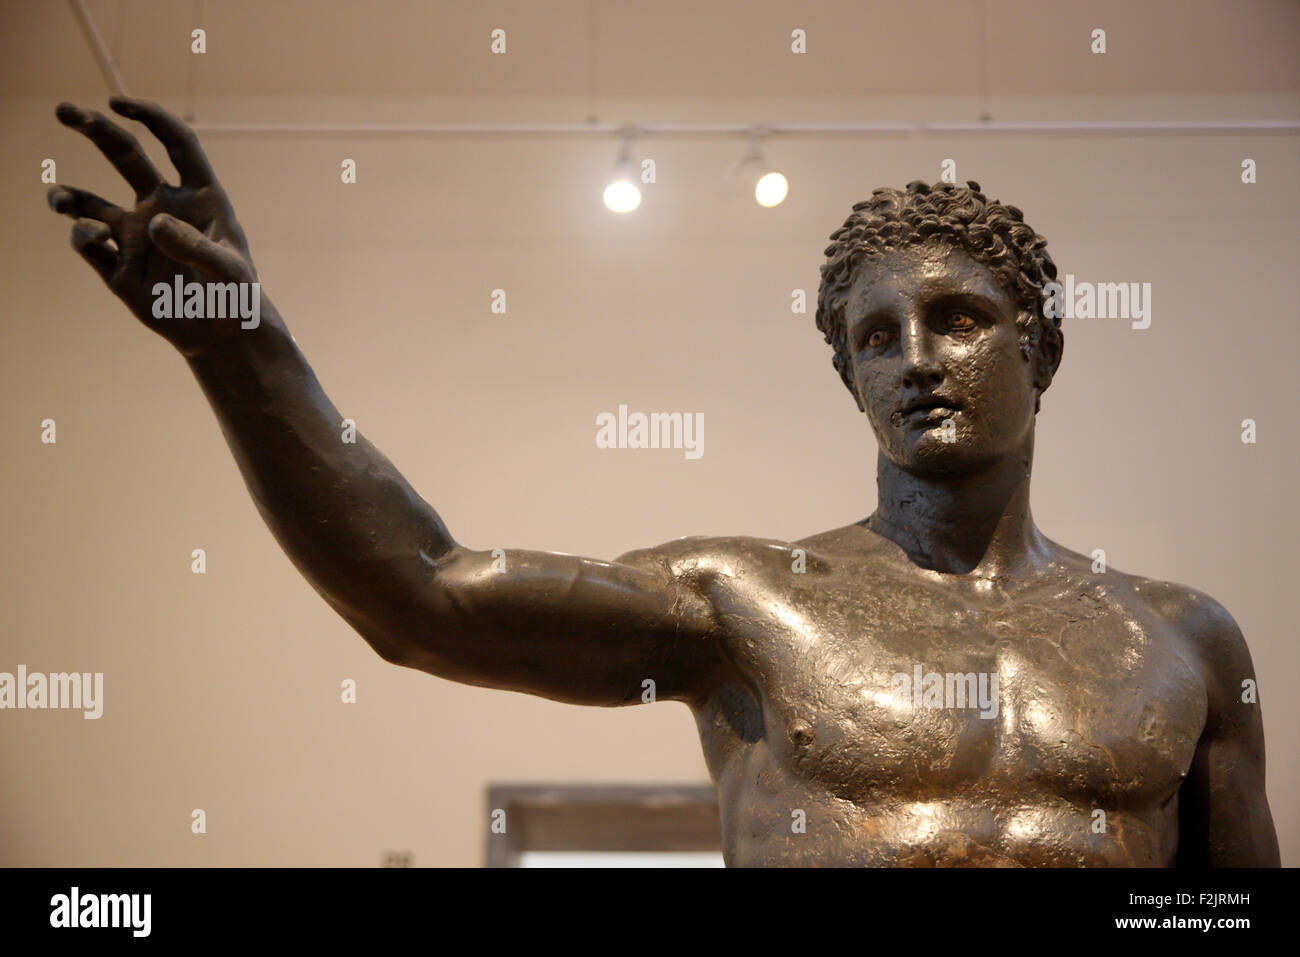 Bronze statue of a youth from the Antikythera shipwreck (340-330 BC) in the National Archaelogical Museum, Athens, Greece. Stock Photo